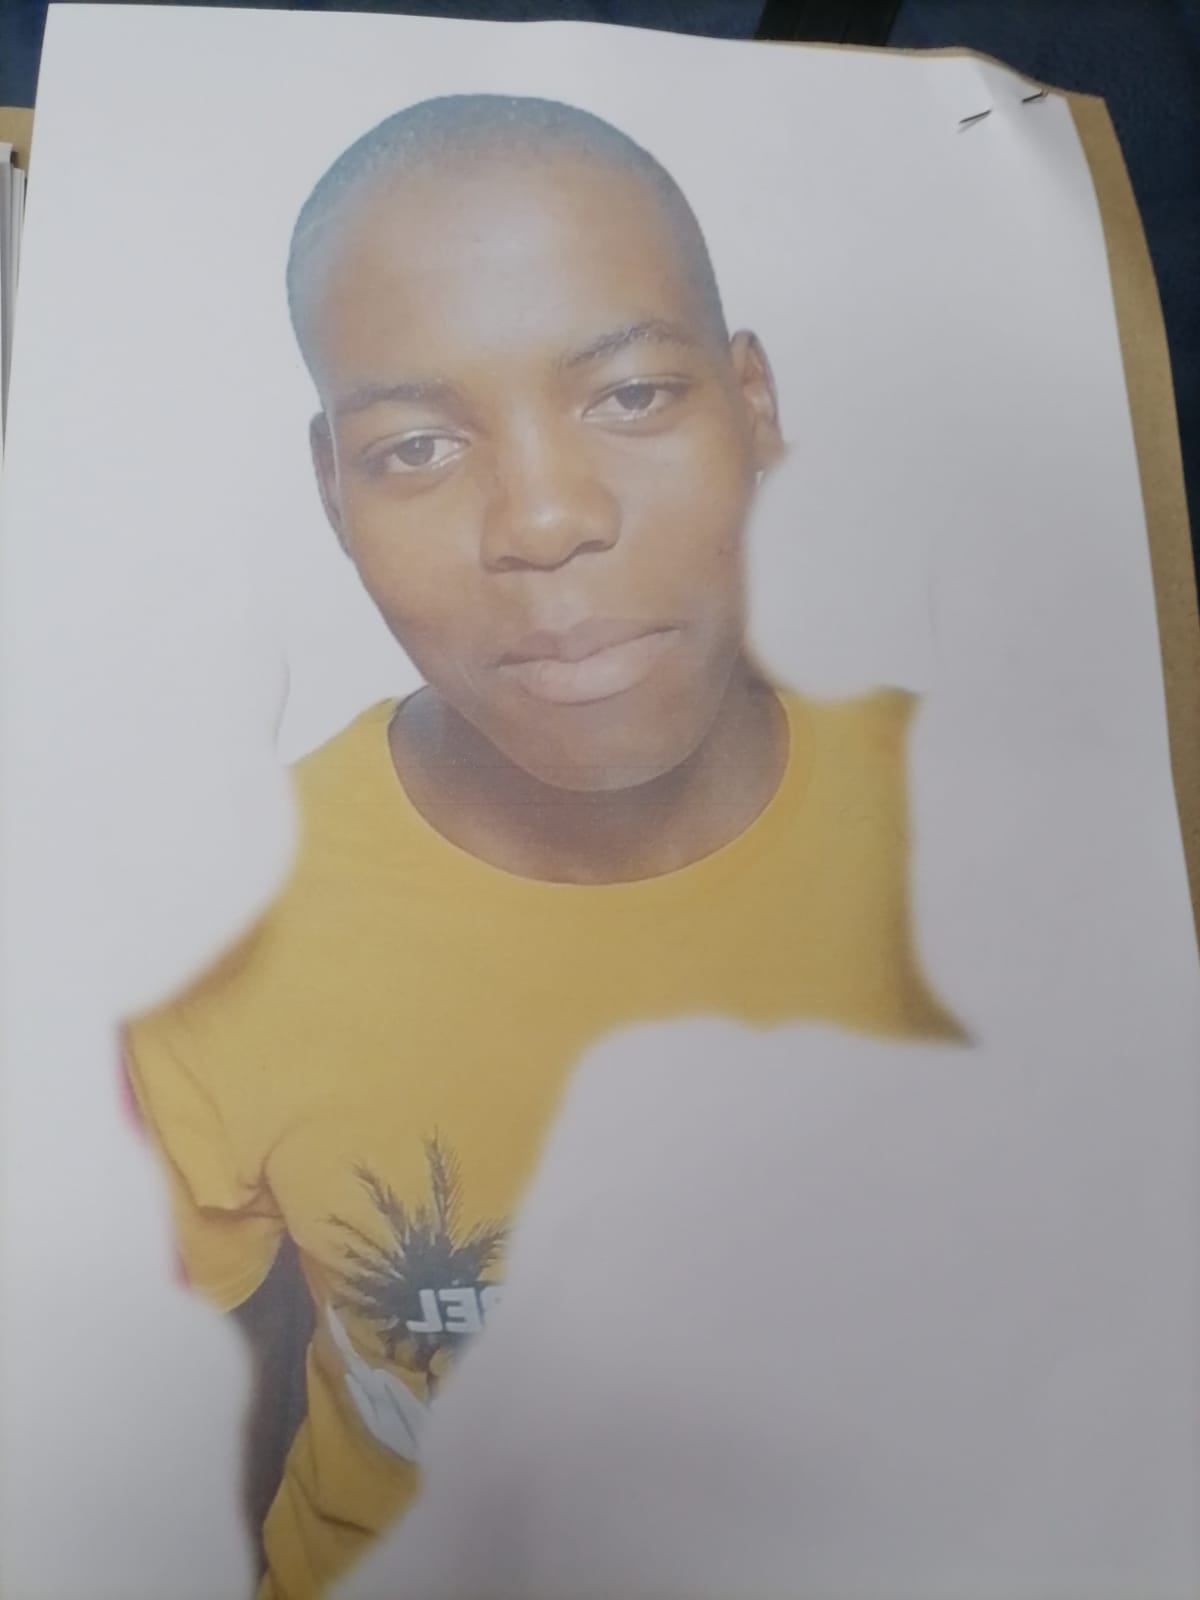 Modjadjiskloof police request public assistance to locate a missing 16-year-old boy